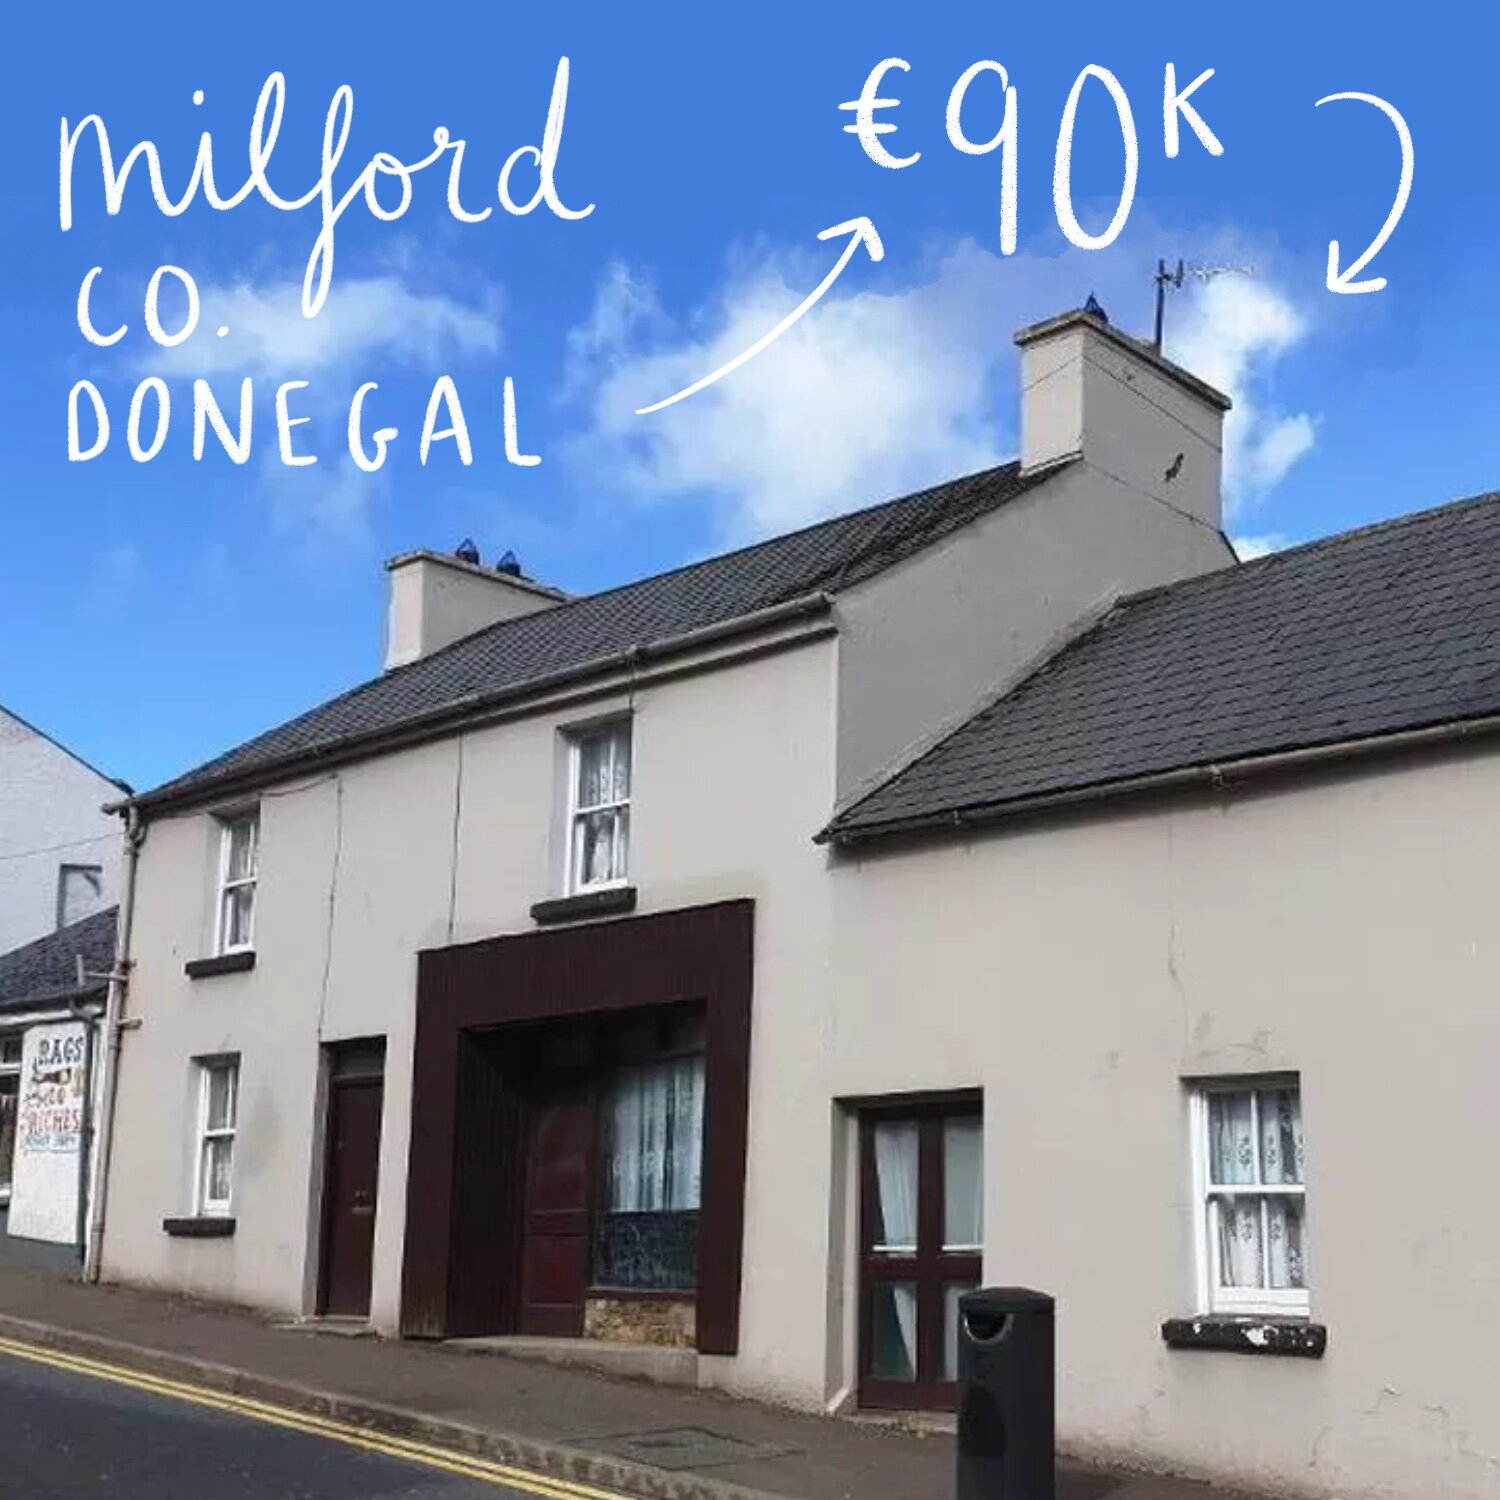 Milford, Co. Donegal. €90k